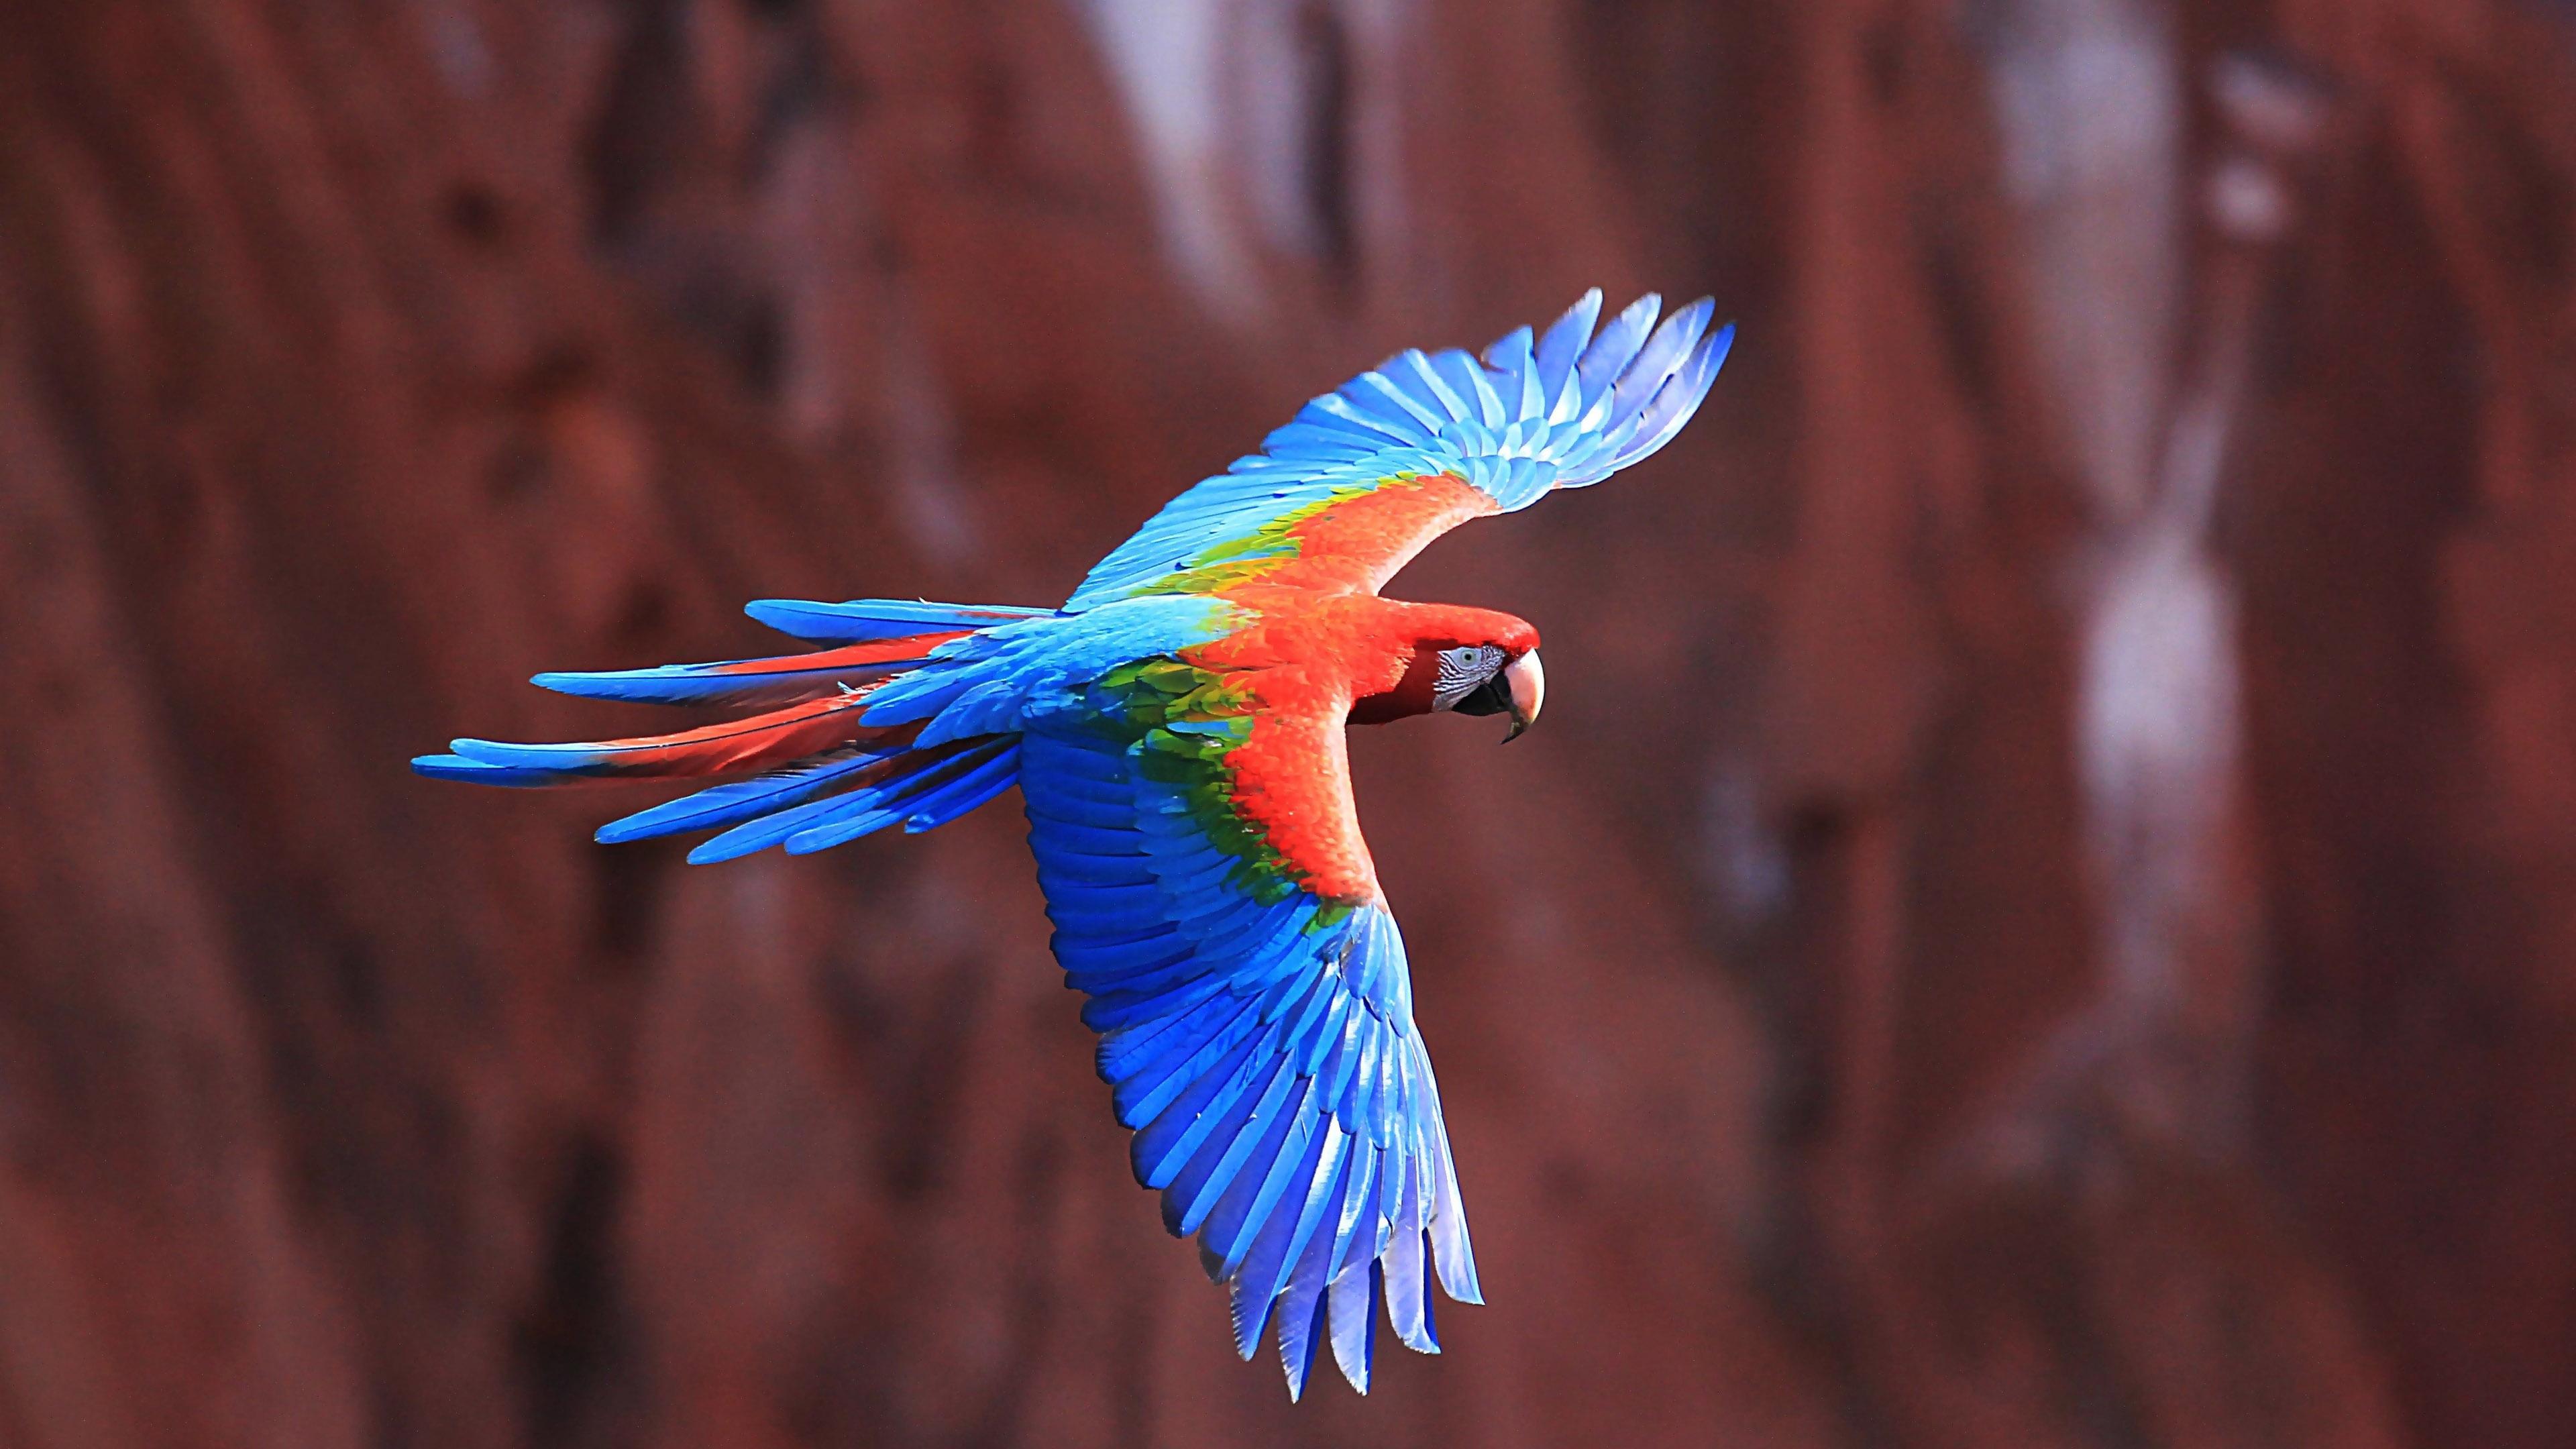 Macaw Parrot Colorful Bird Flying Wallpaper